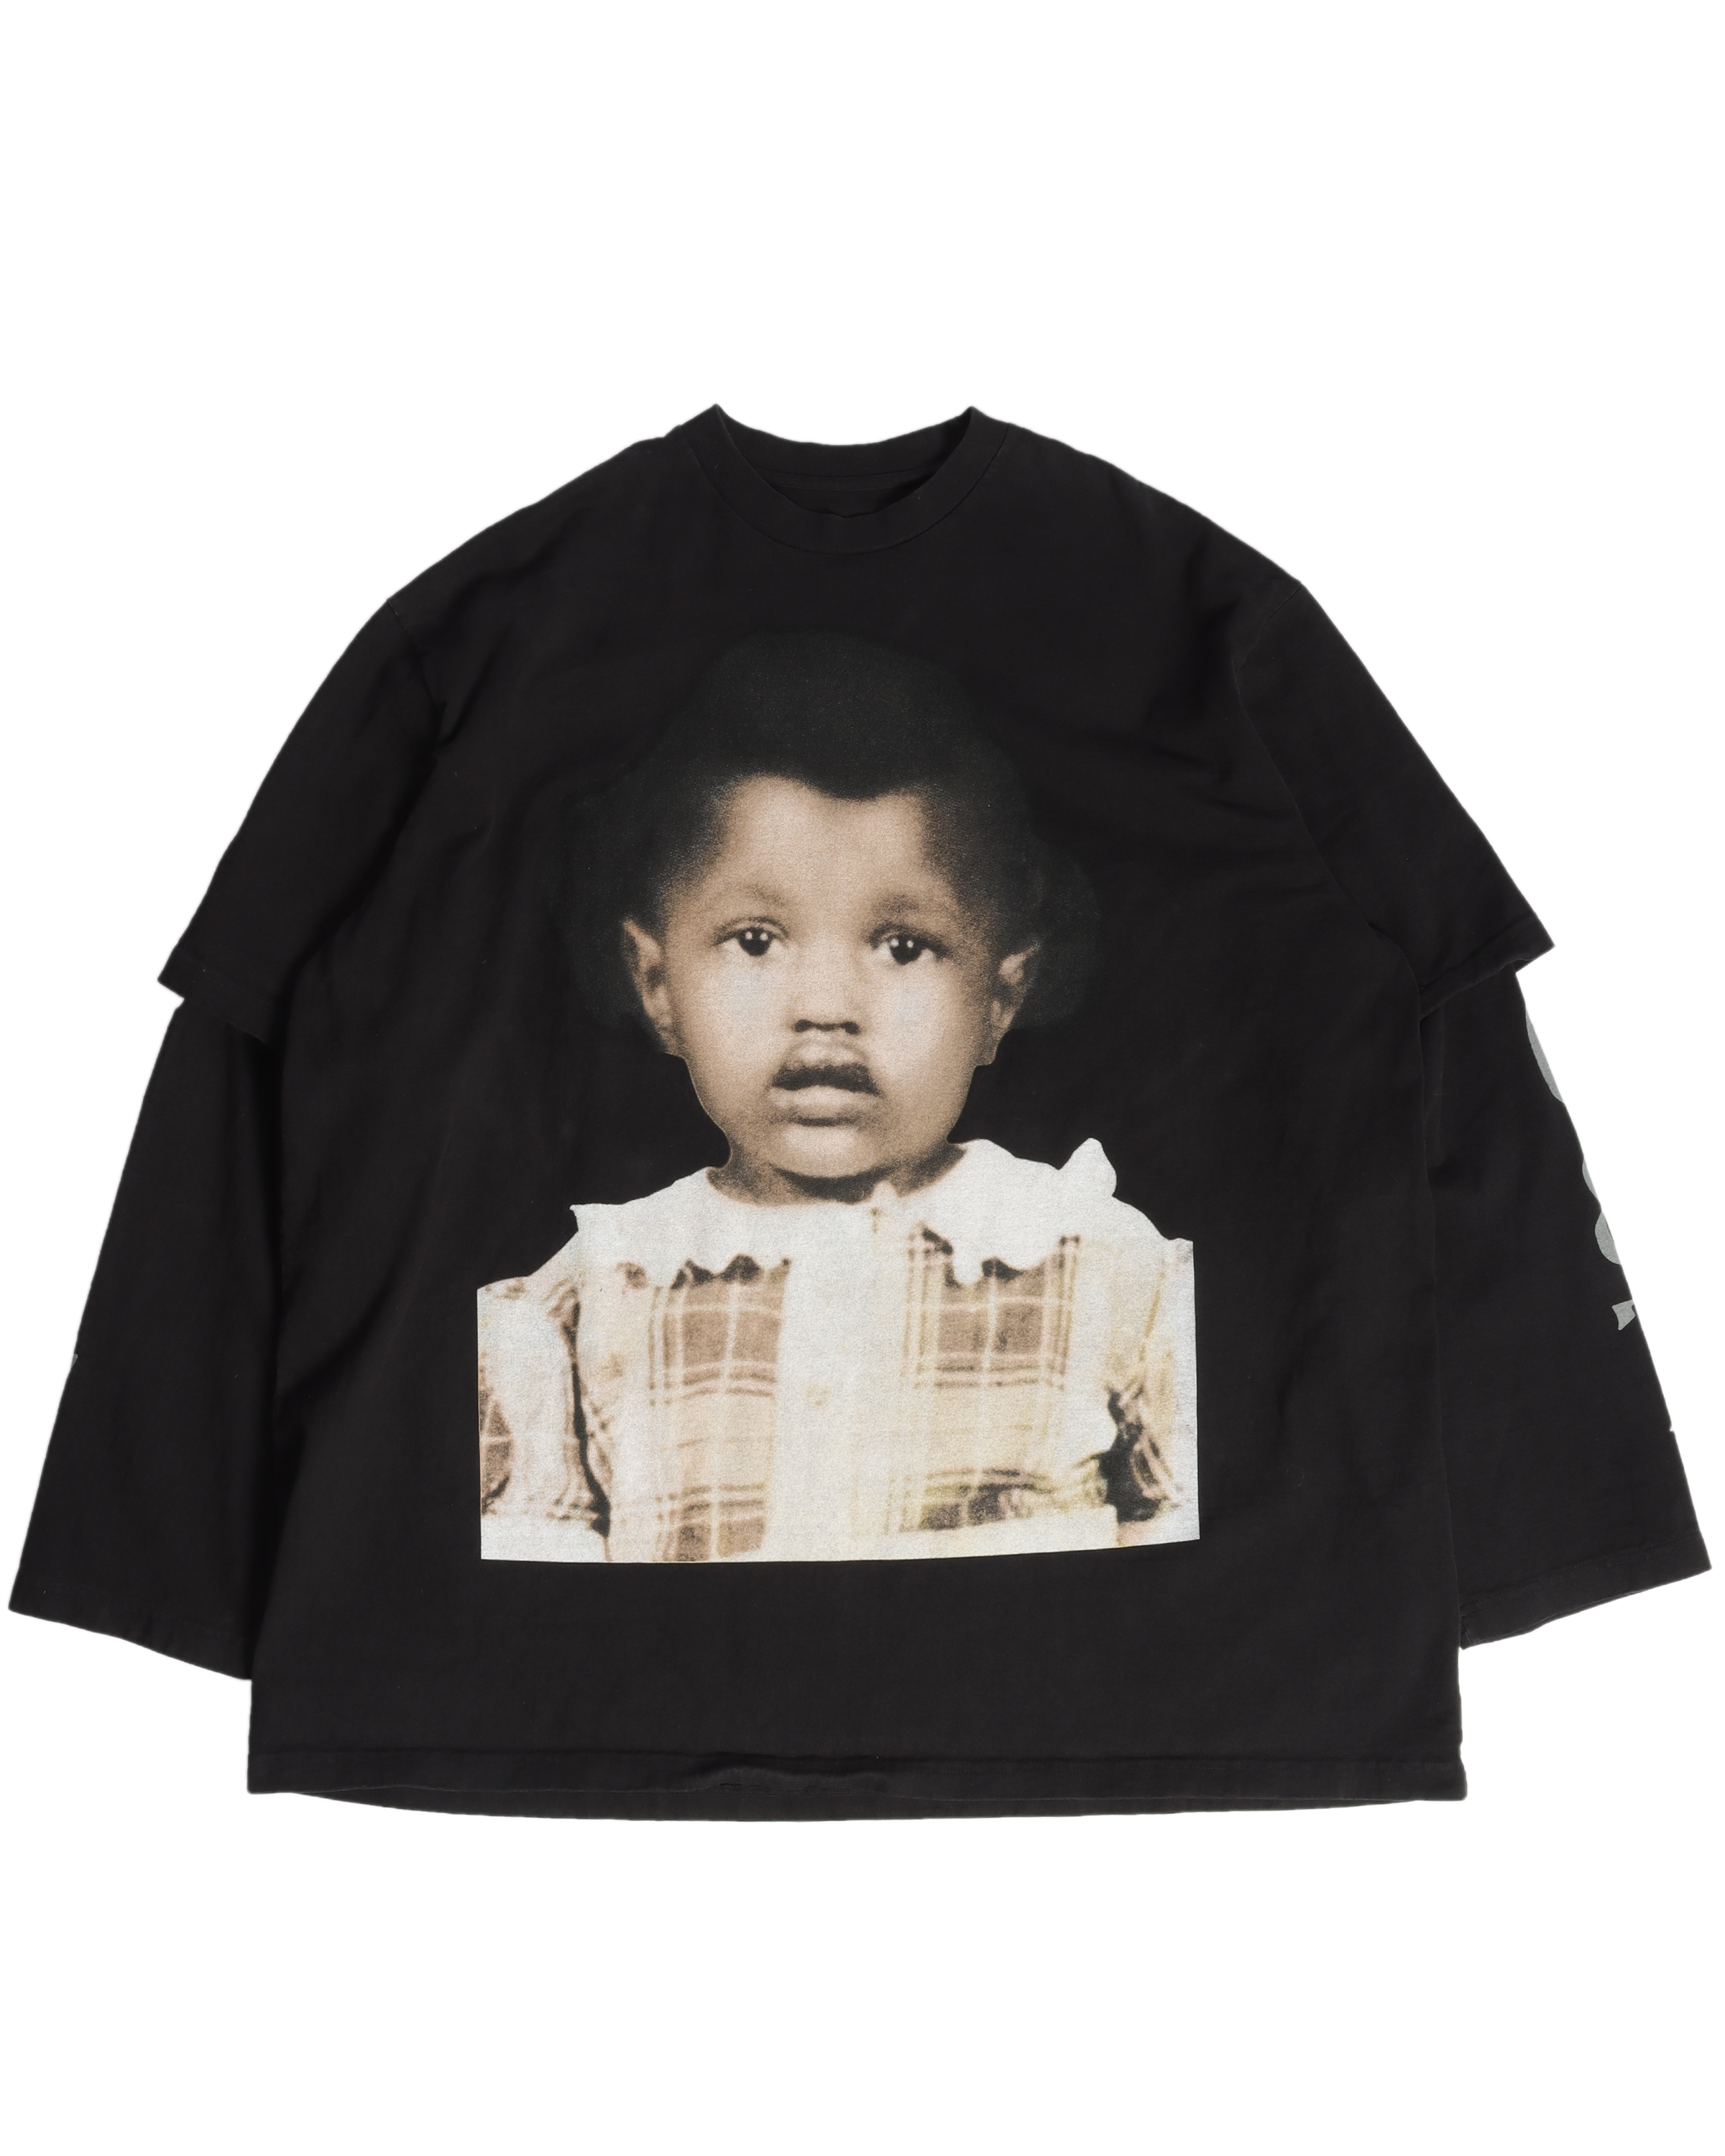 Kanye West Donda Event Chicago Exclusive Double Layered L/S T-Shirt